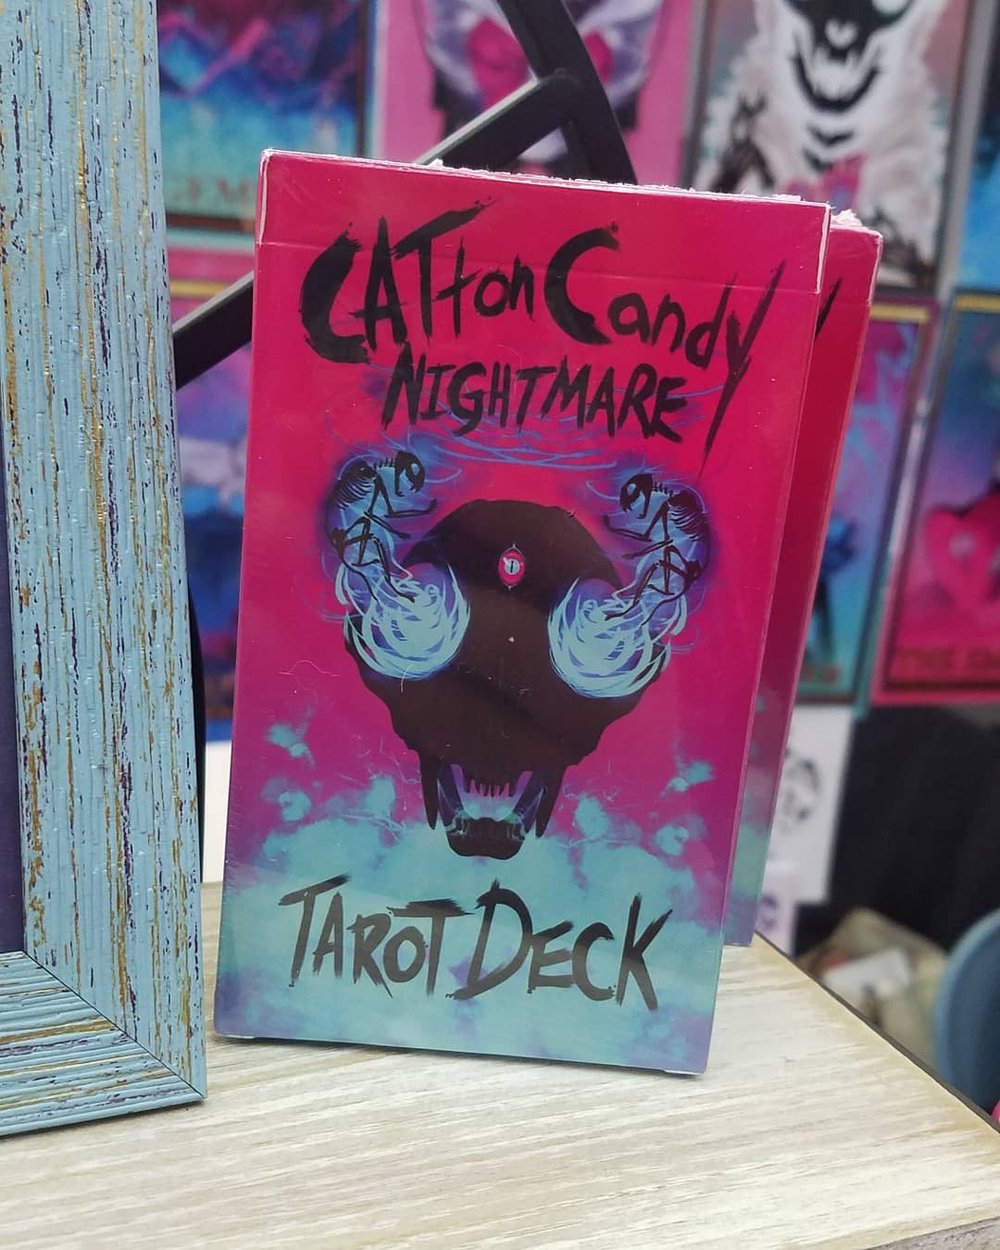 Image of CATton Candy Nightmare Tarot Deck